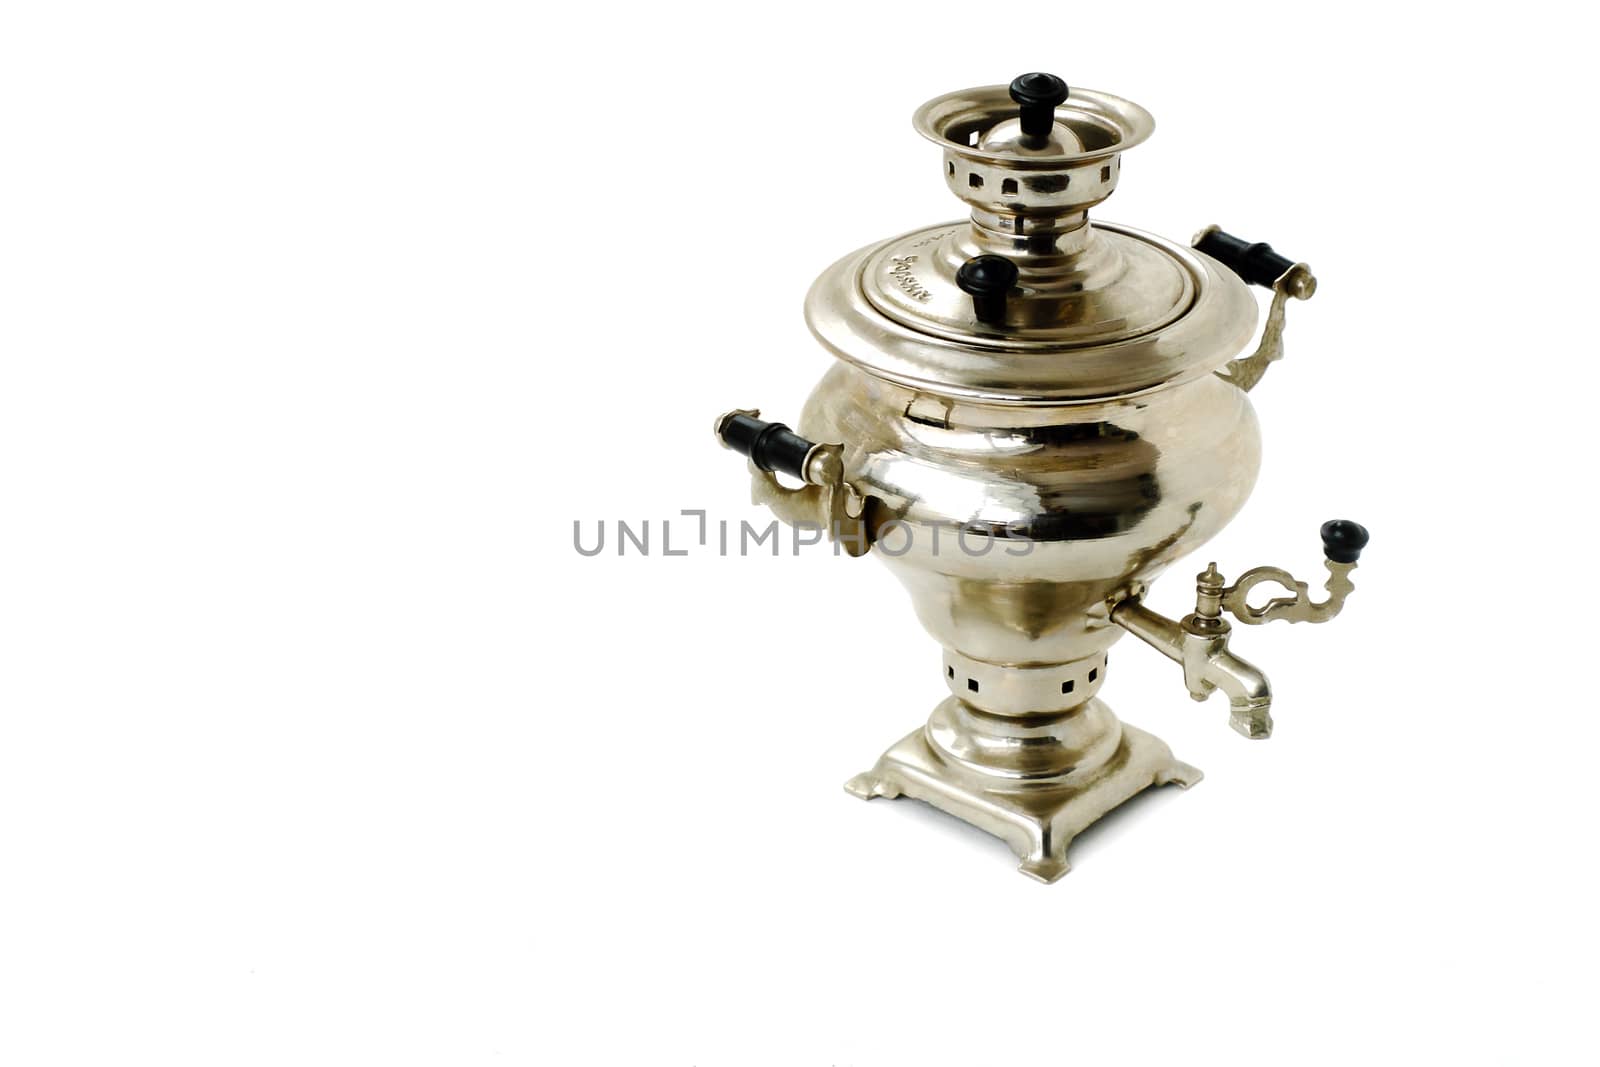 Model of the electric samovar white shiny metal on a white background in the singular.